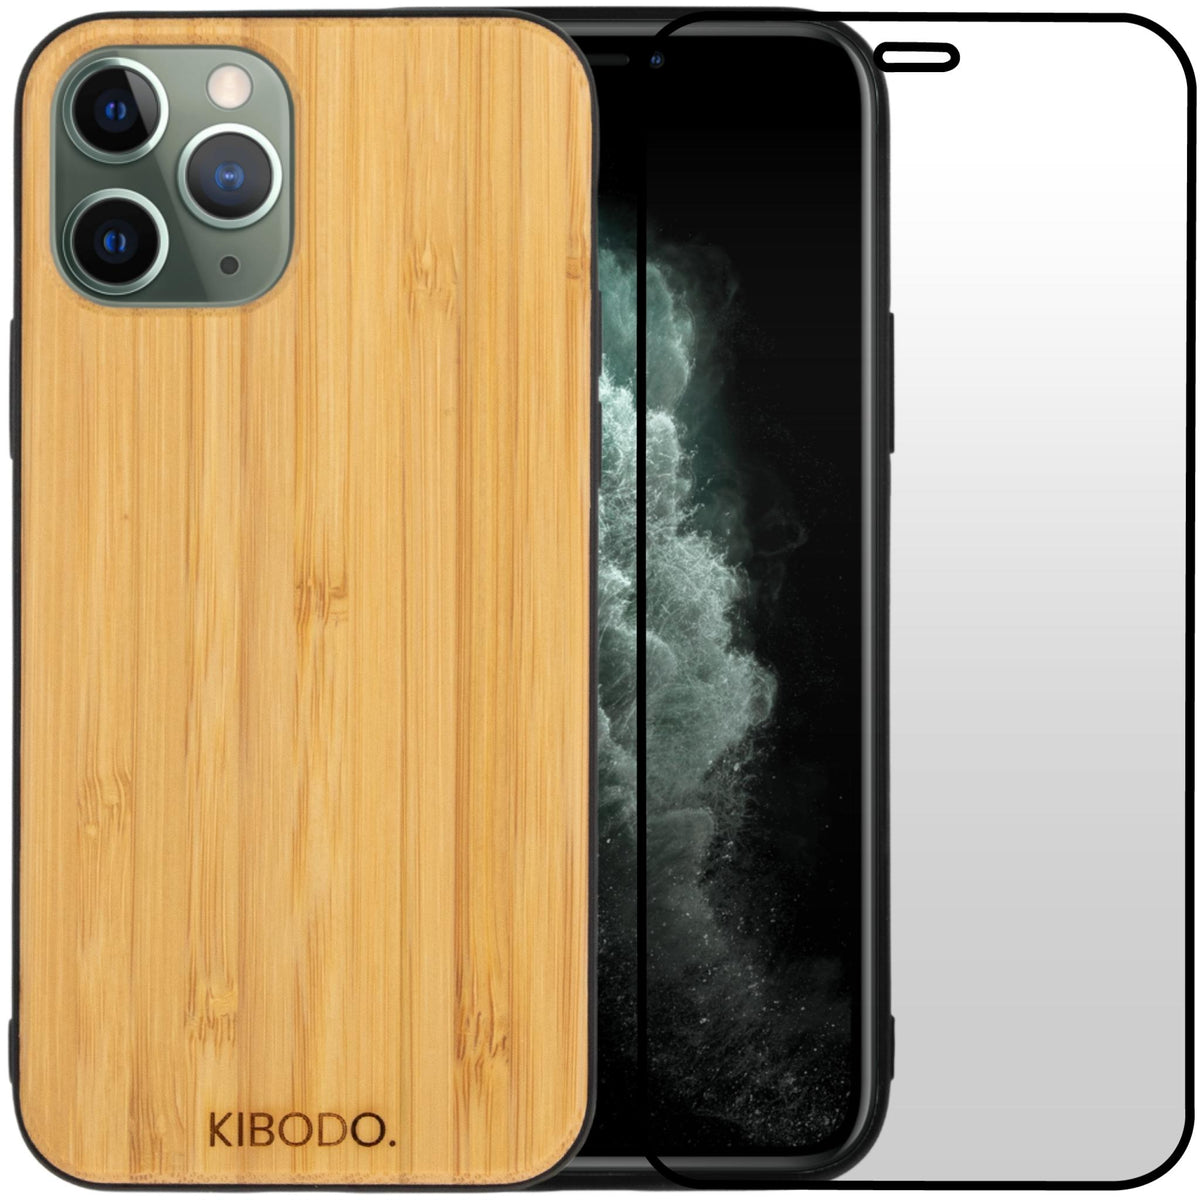 iPhone 11 Pro Max Wooden Case + Screen Protector